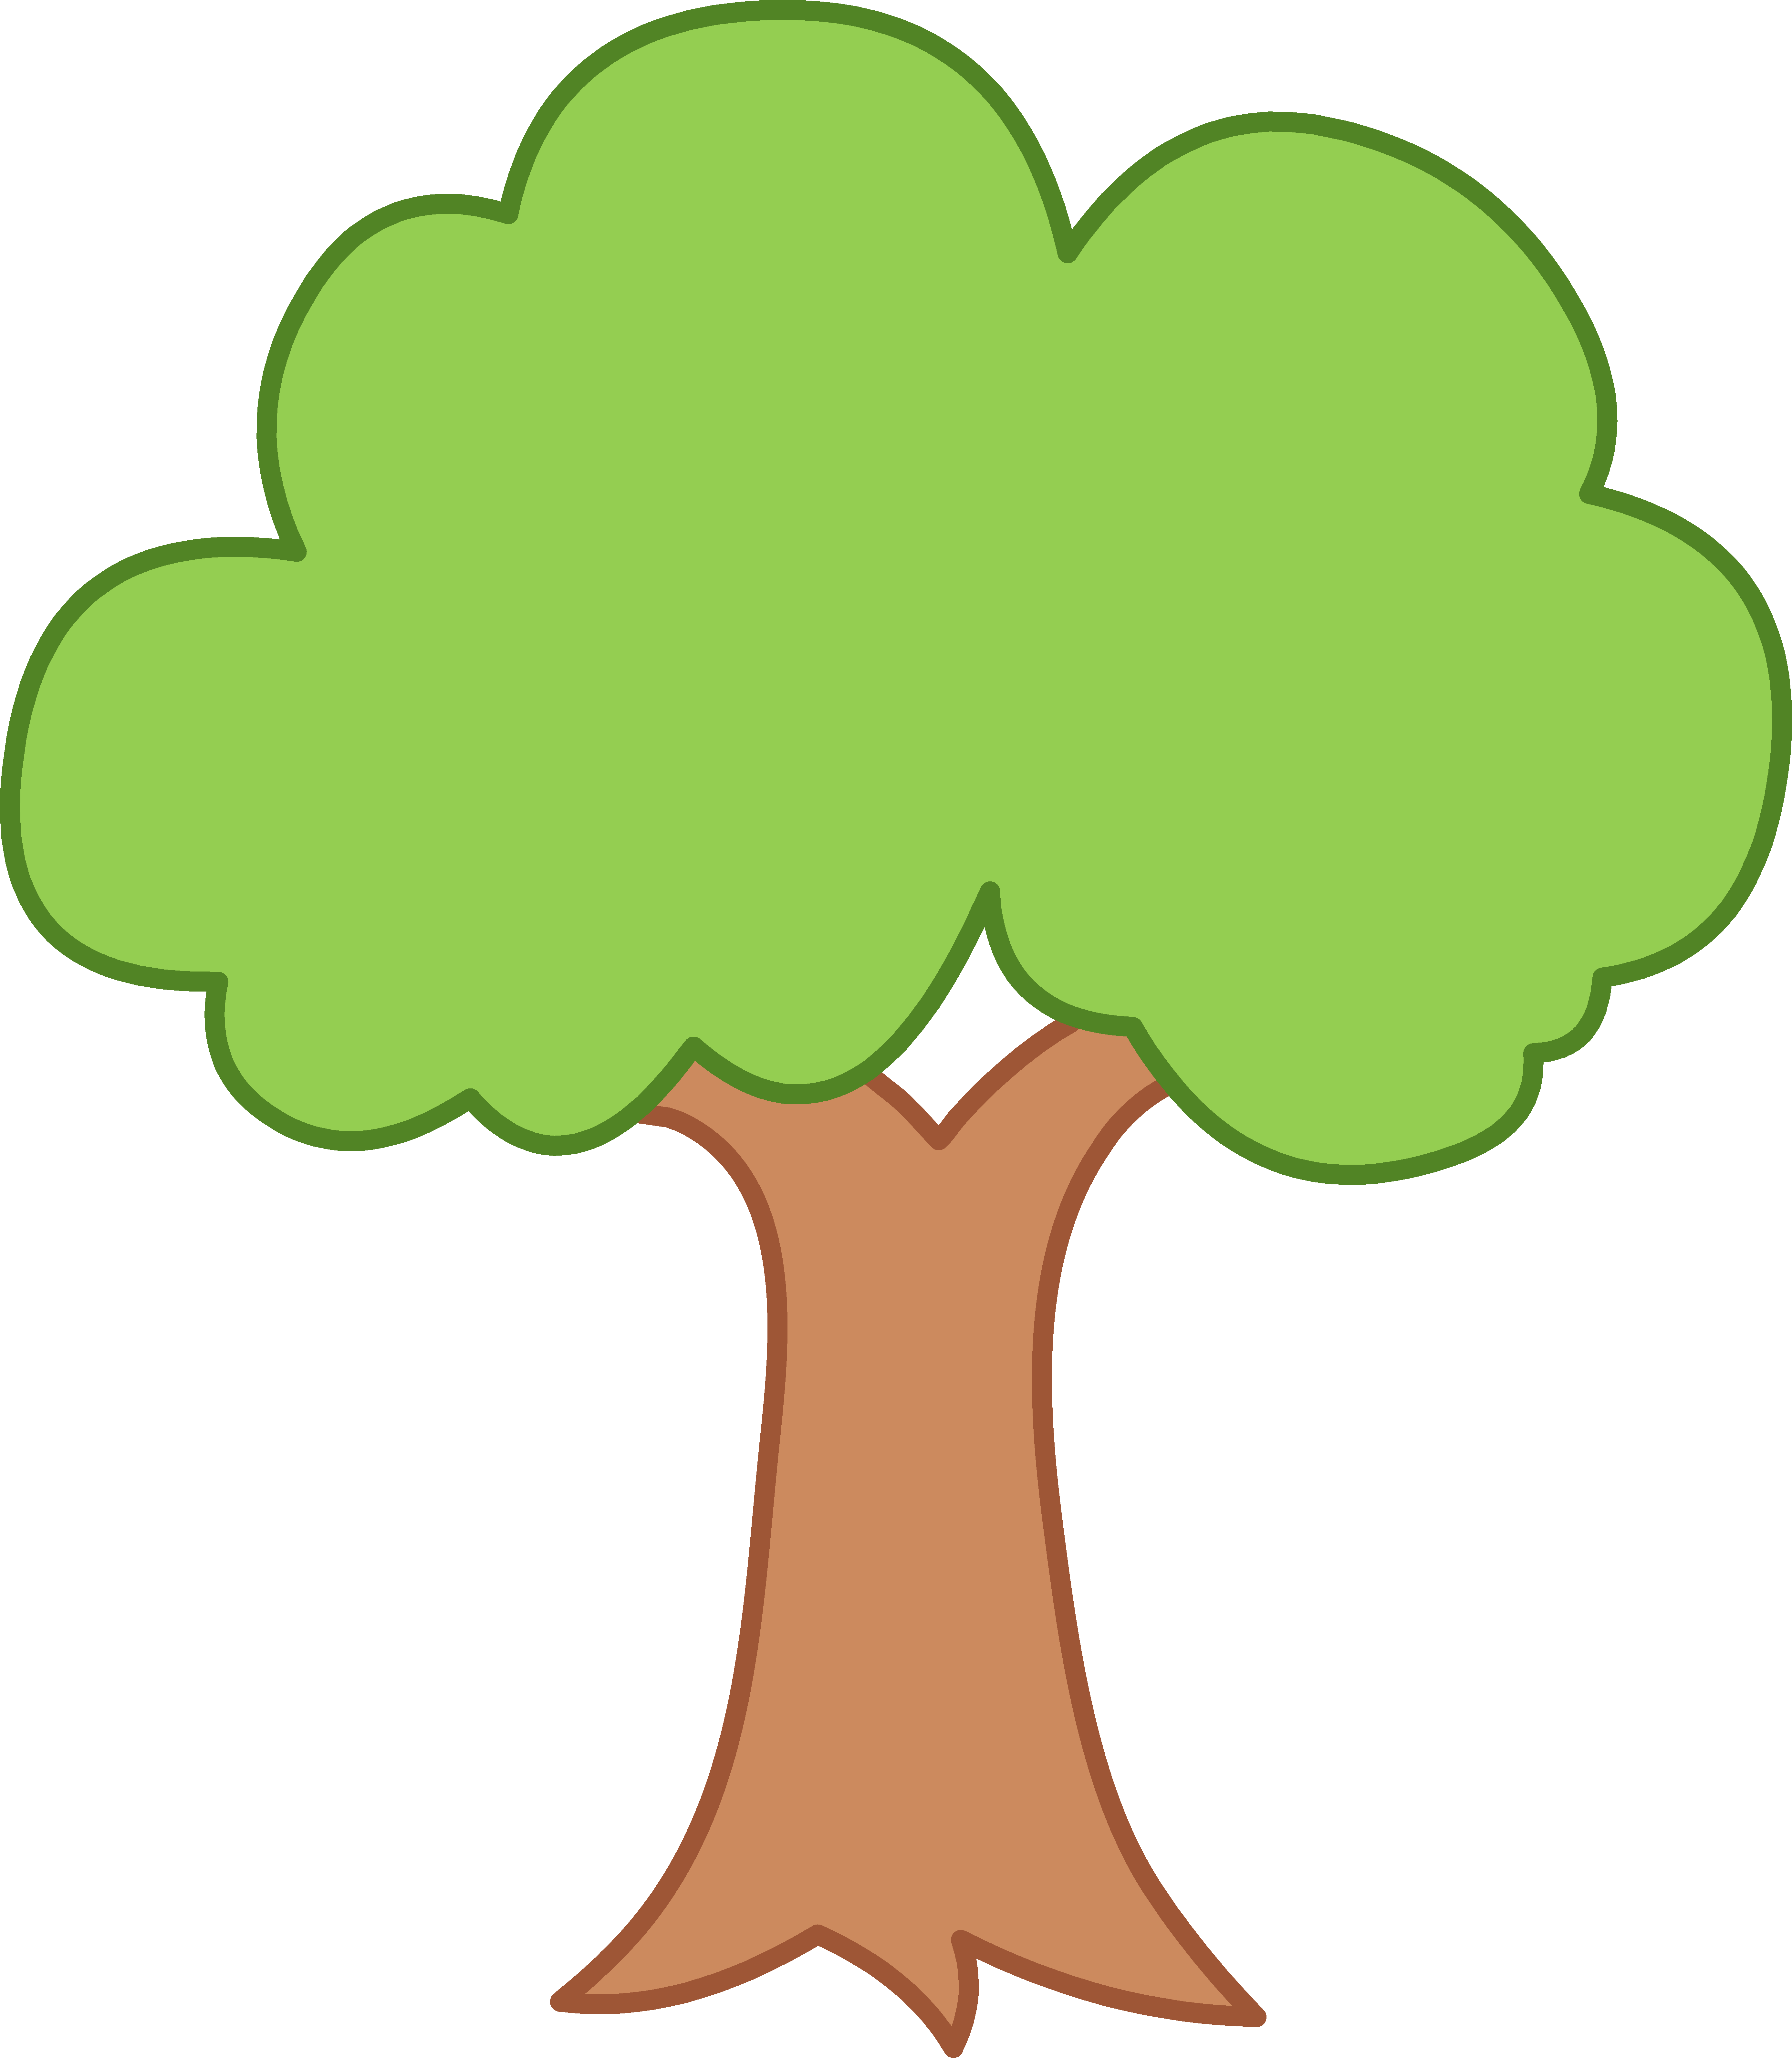 Tree drawing clipart transparent